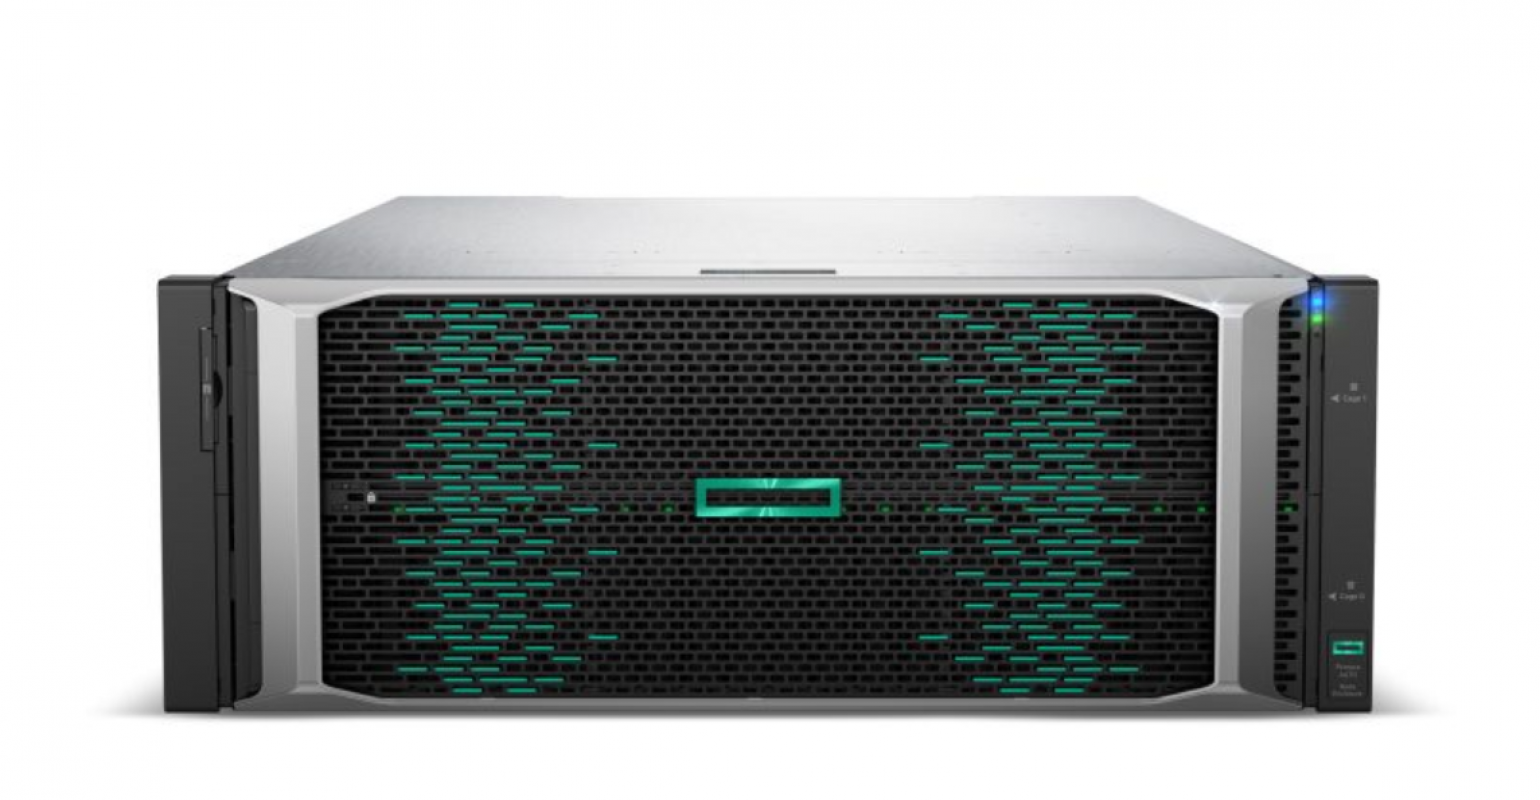  HPE Storages